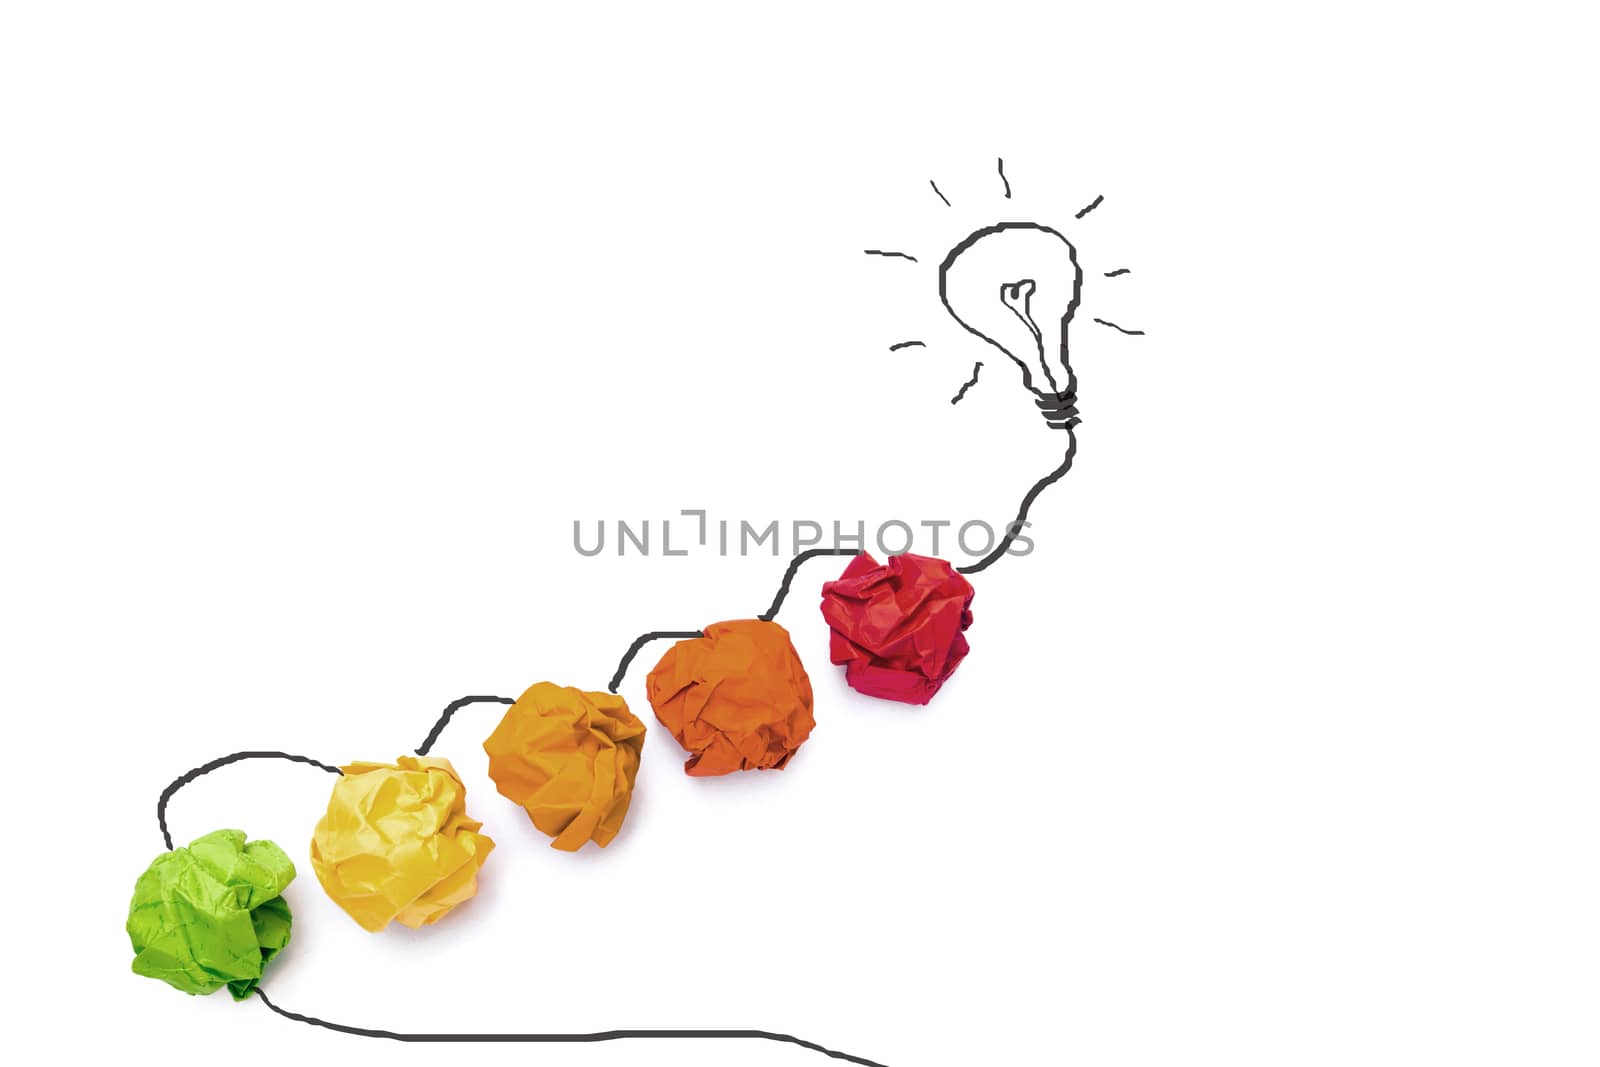 Concept idea with colorful paper and graphic of light bulb isolate on white background